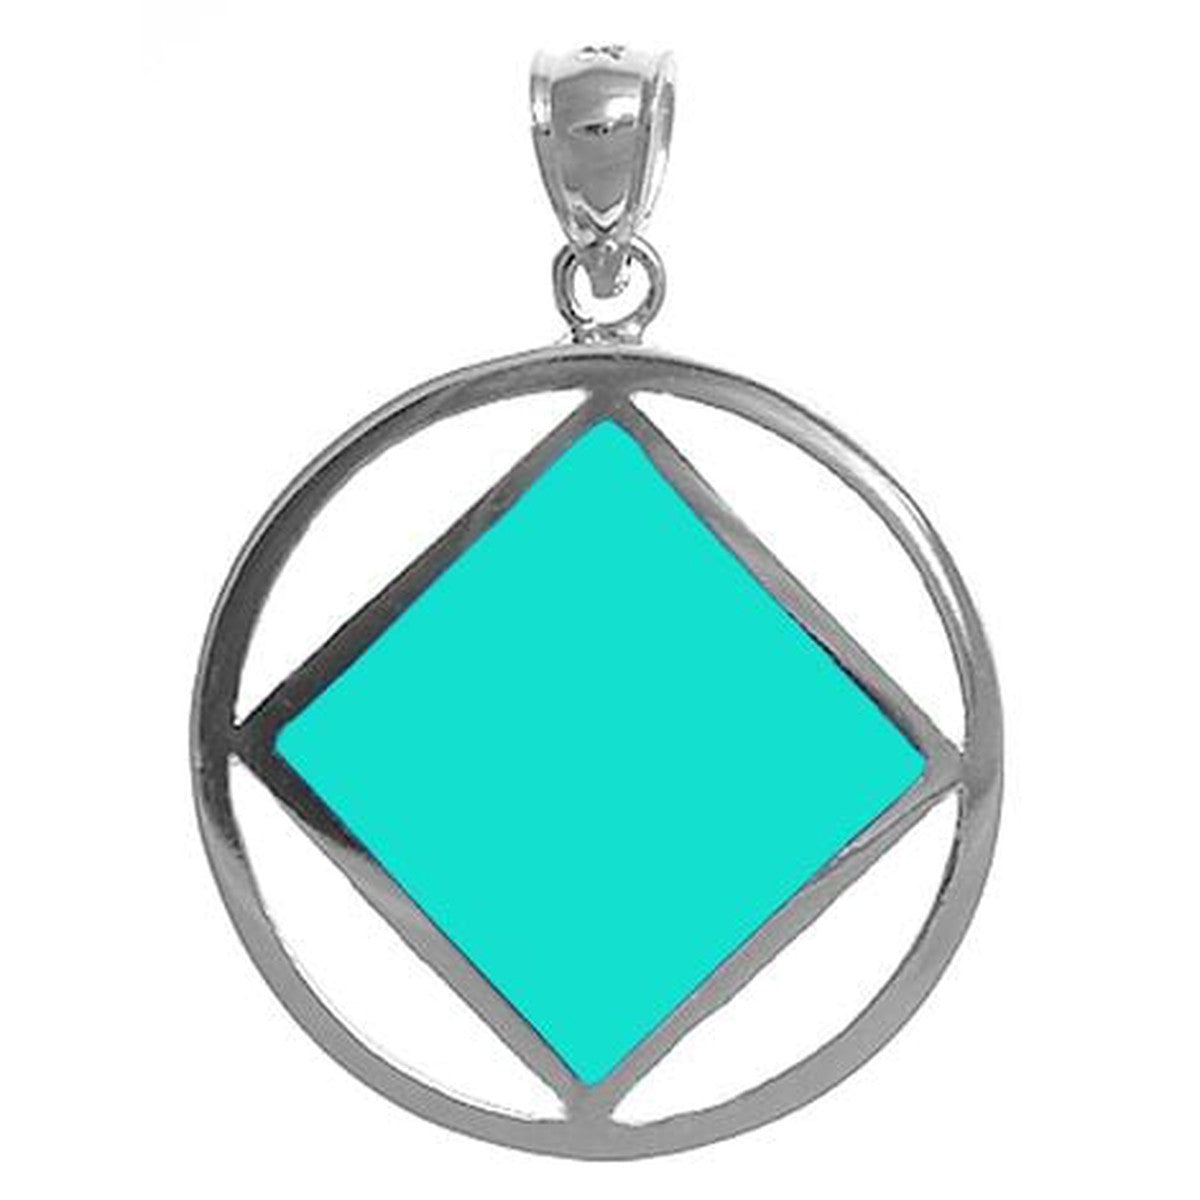 Sterling Silver Pendant, Narcotics Anonymous Symbol Square With Turquoise In Color Enamel Inlay, Large Size